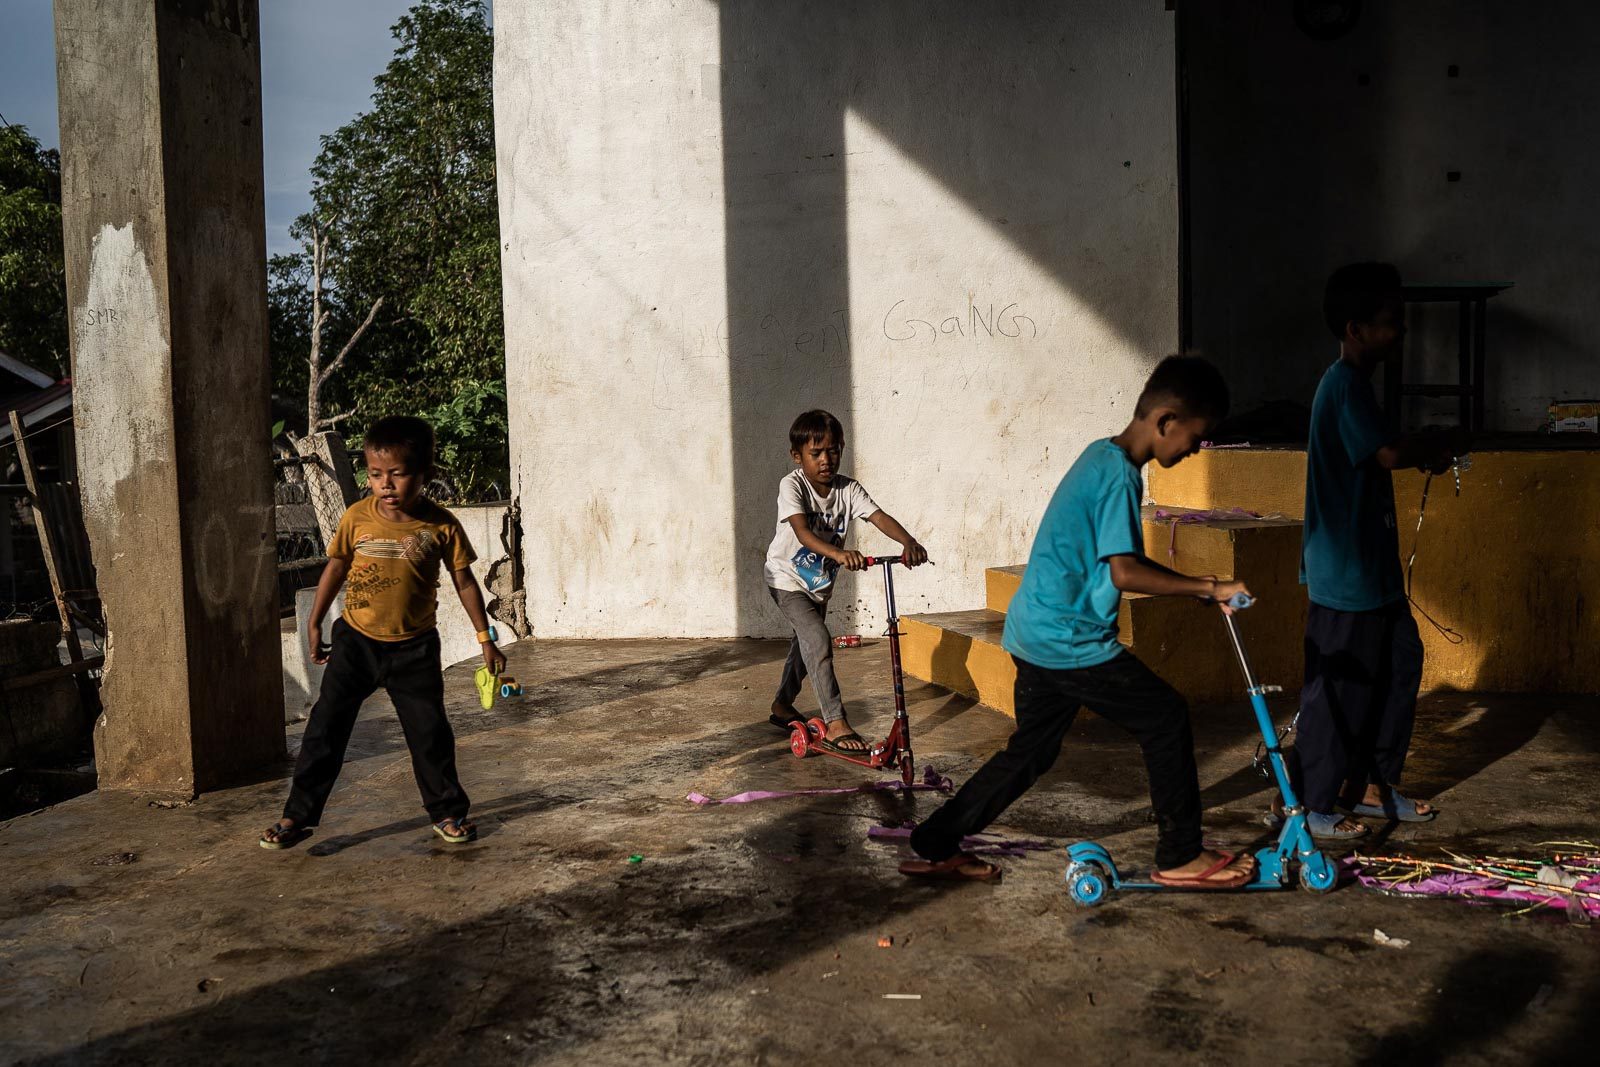 DEALING WITH TRAUMA. Children, some sons of rebel fighters, play with gifts in Basilan Island. Many of the ISIS fighters that came to Marawi in 2017, including its leader Isnilon Hapilon, were from this island. Photo by Martin San Diego